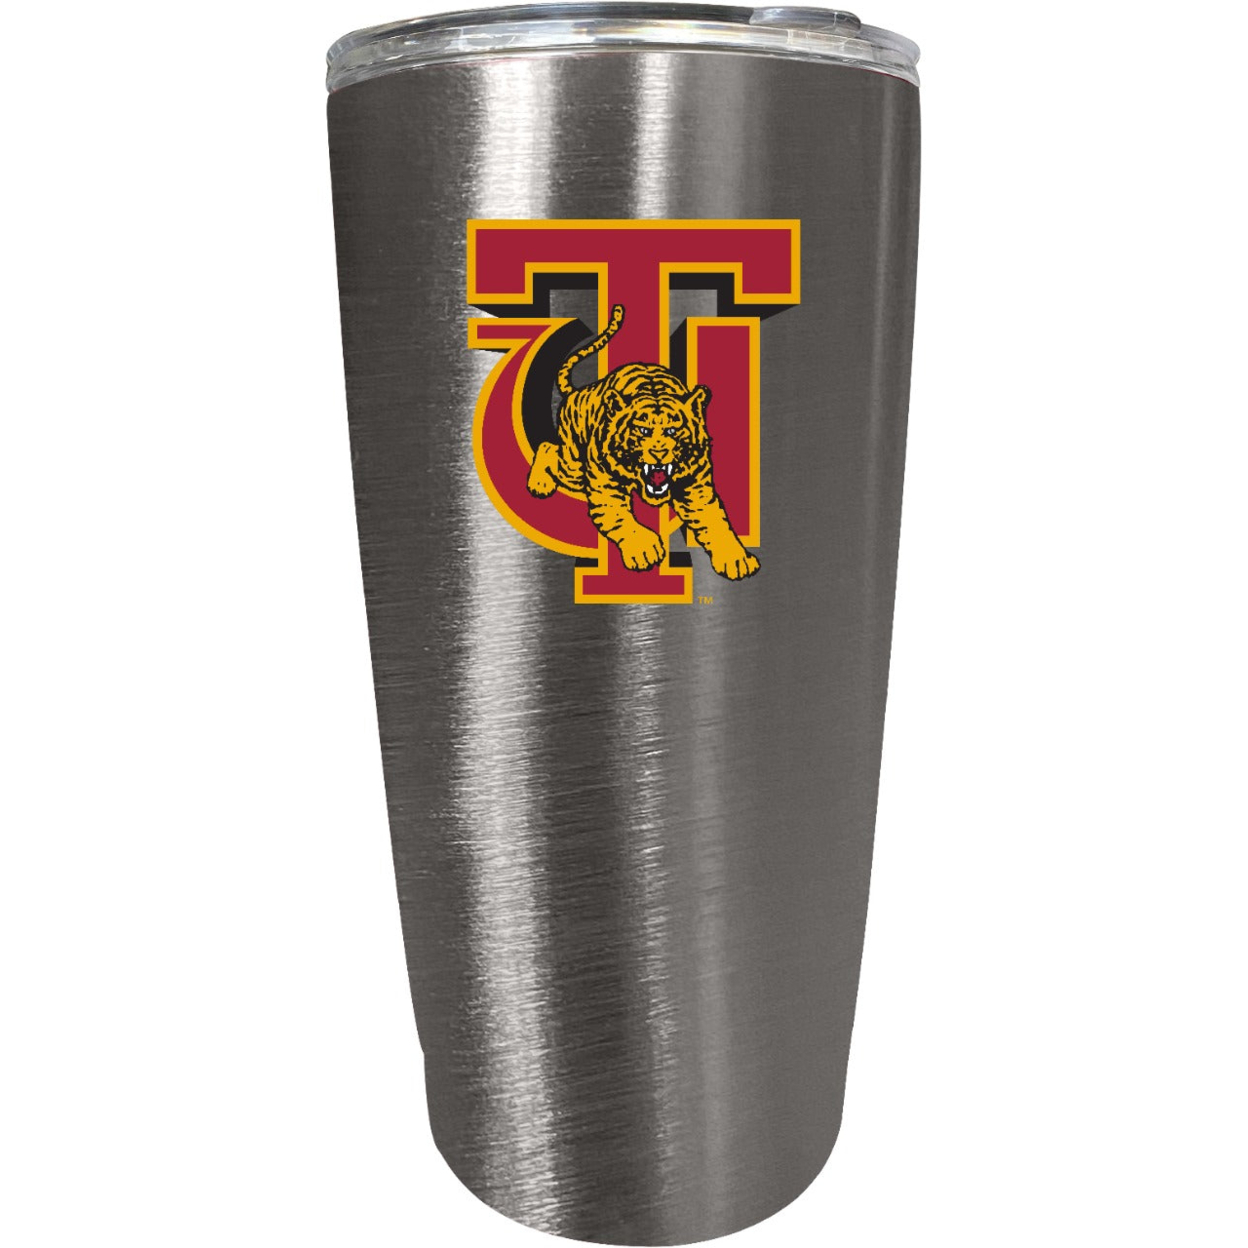 Tuskegee University 16 Oz Insulated Stainless Steel Tumbler Colorless